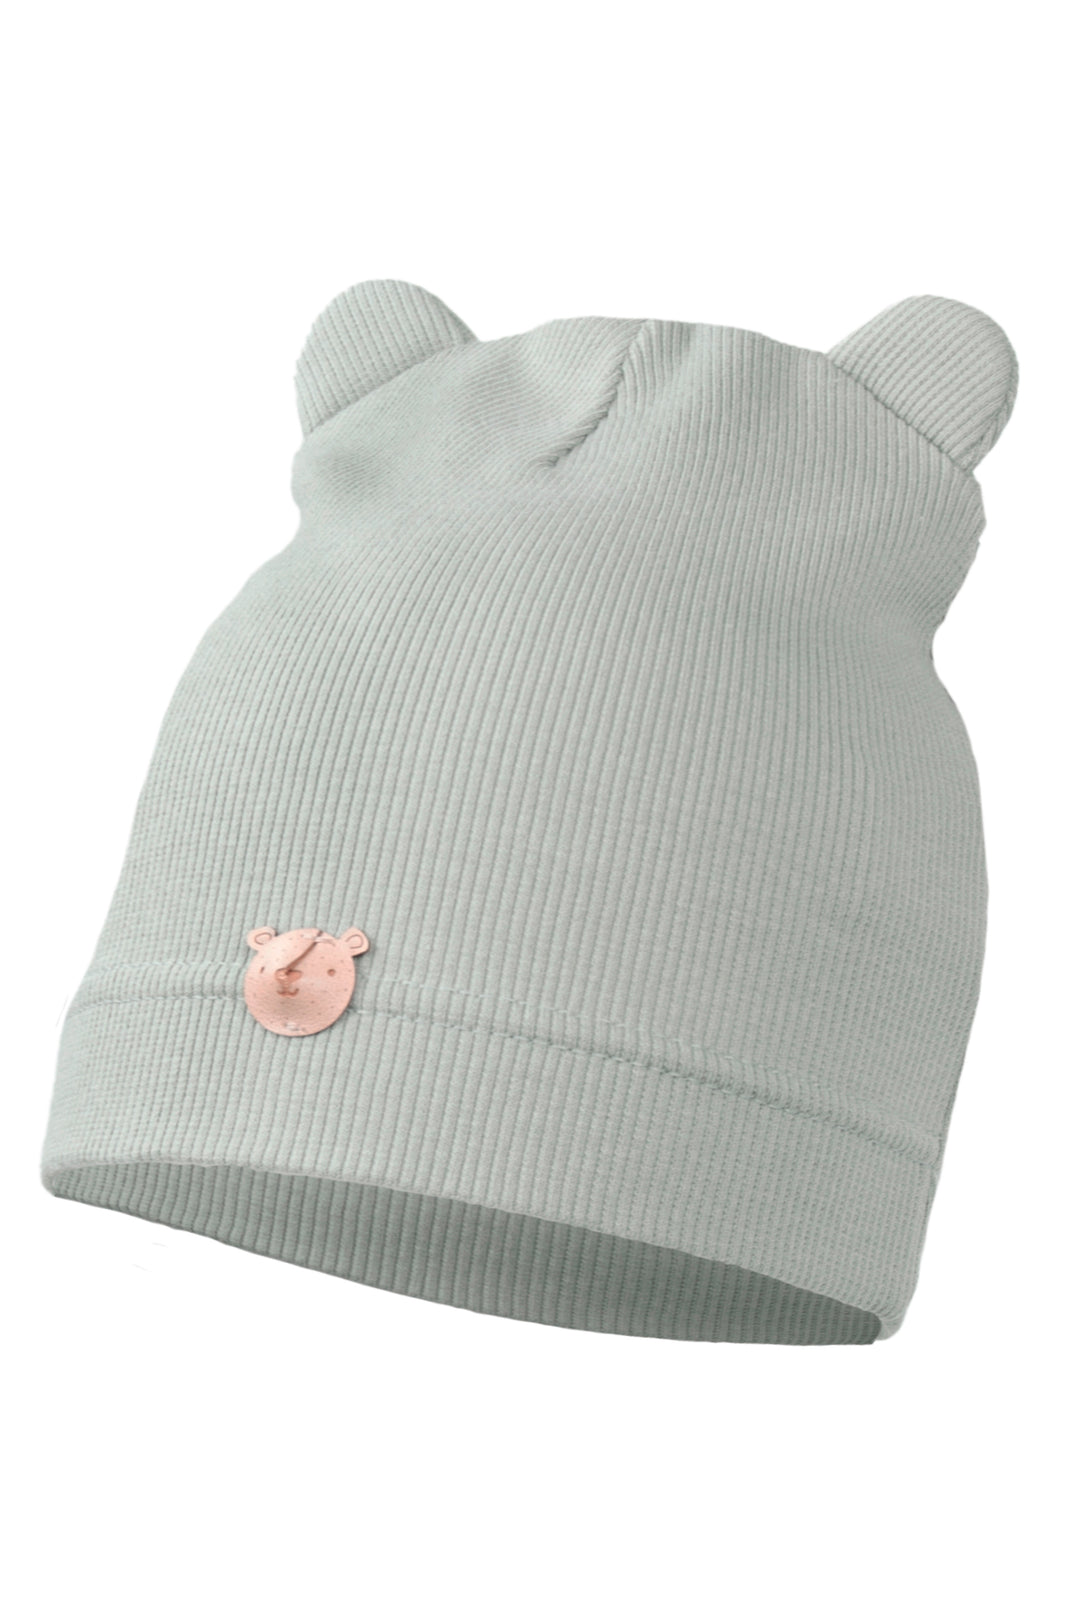 Jamiks "Flavio" Olive Ribbed Teddy Hat | iphoneandroidapplications